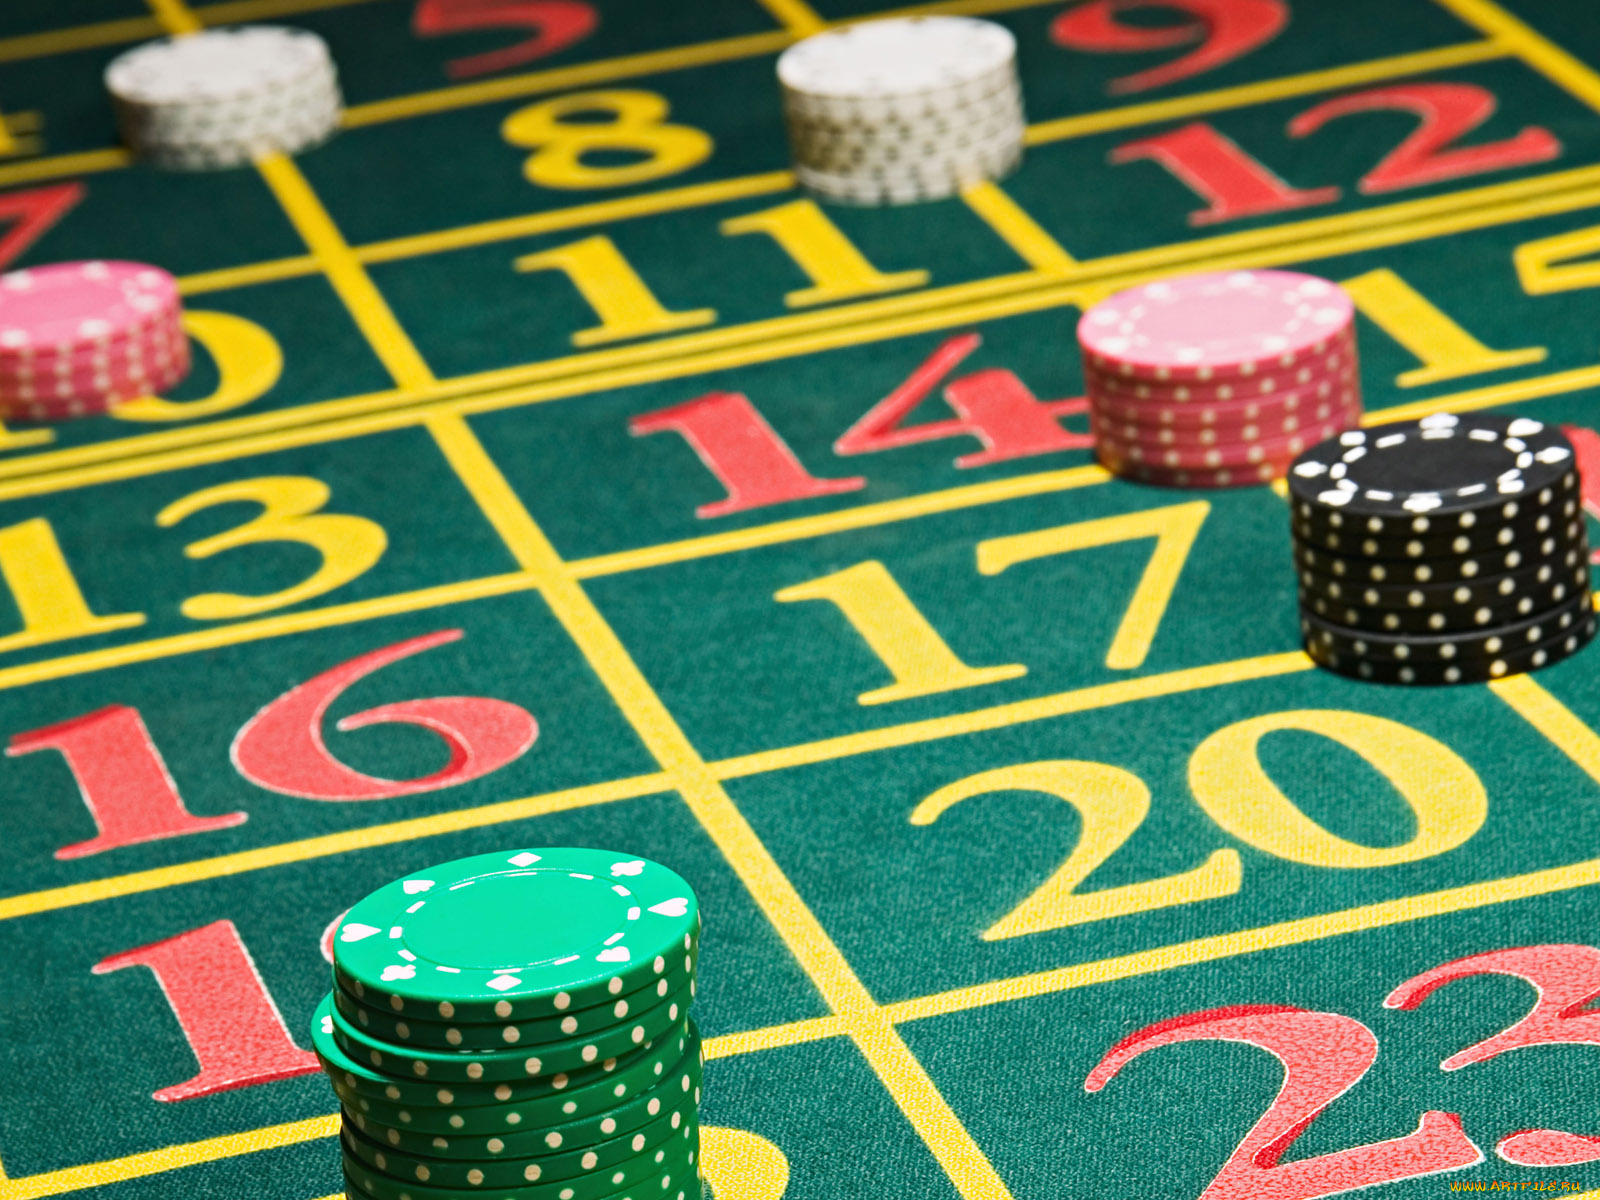 Odds of winning blackjack with basic strategy